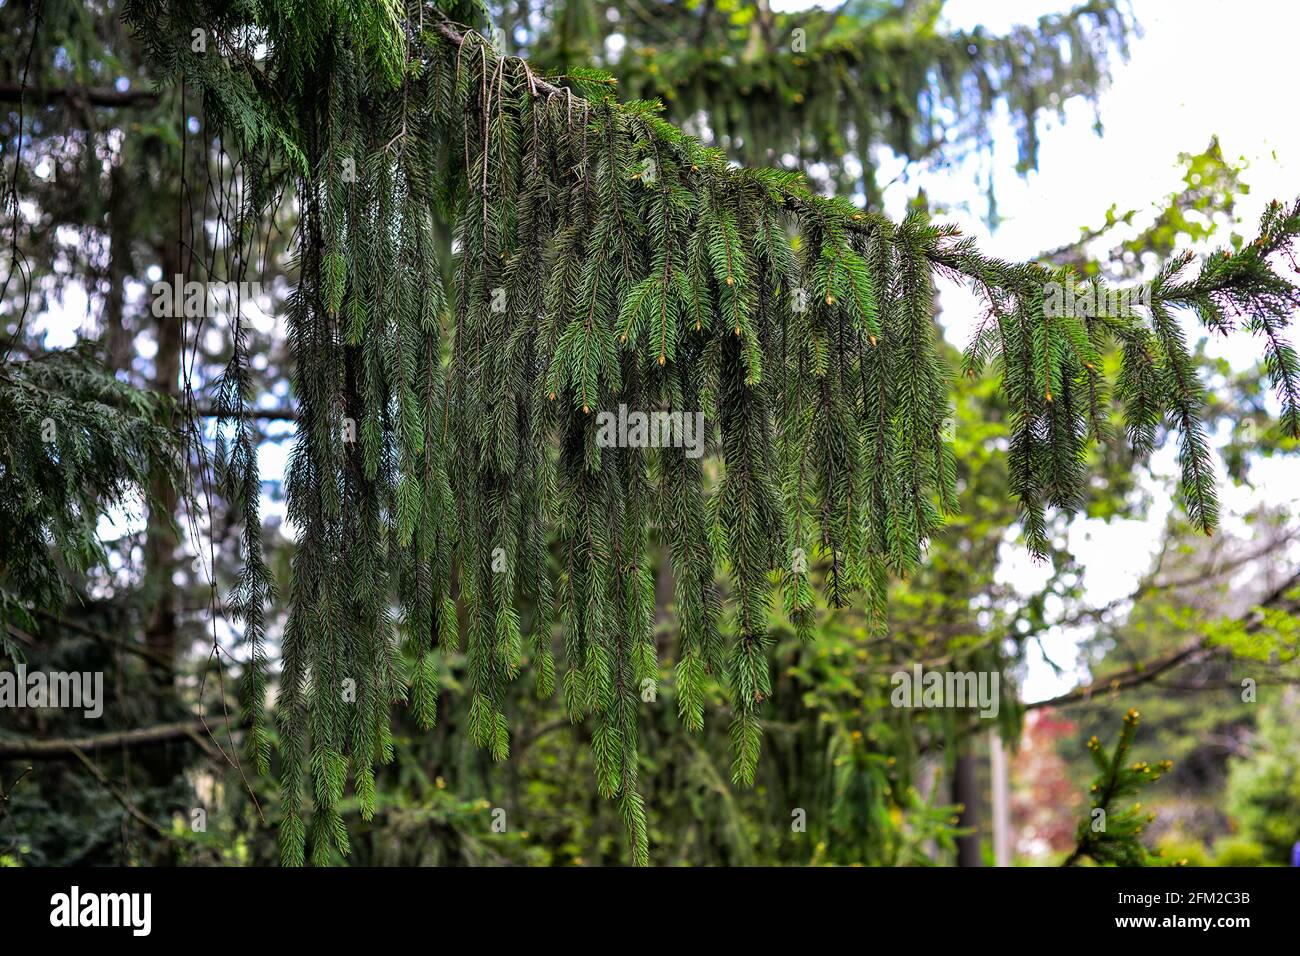 Branch of European spruce or Picea abies. Cultivar Virgata or Snake branch spruce Stock Photo